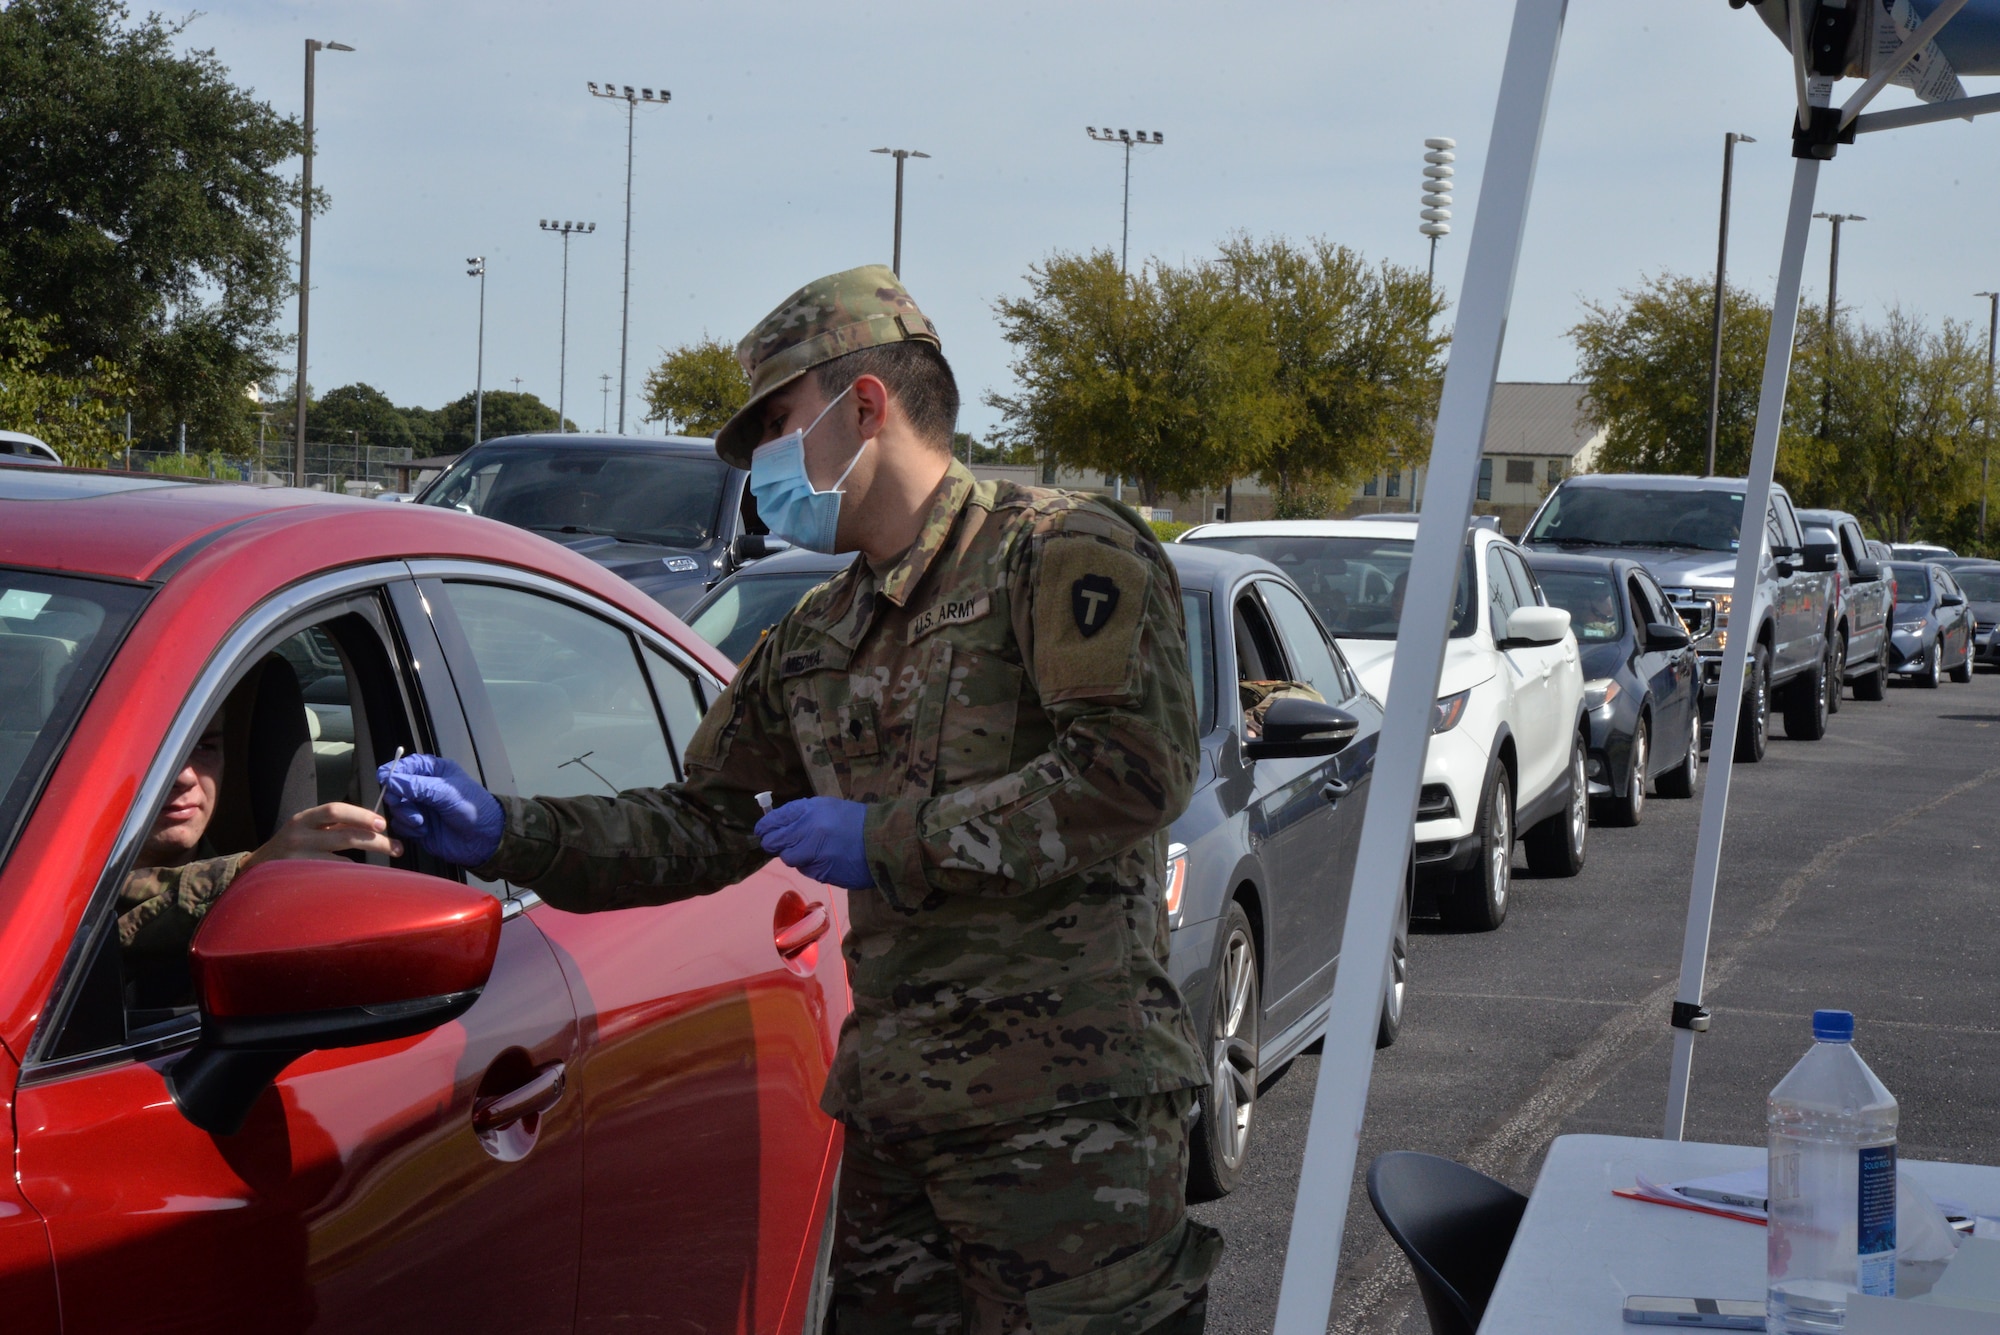 Airman hands out a COVID test swab.